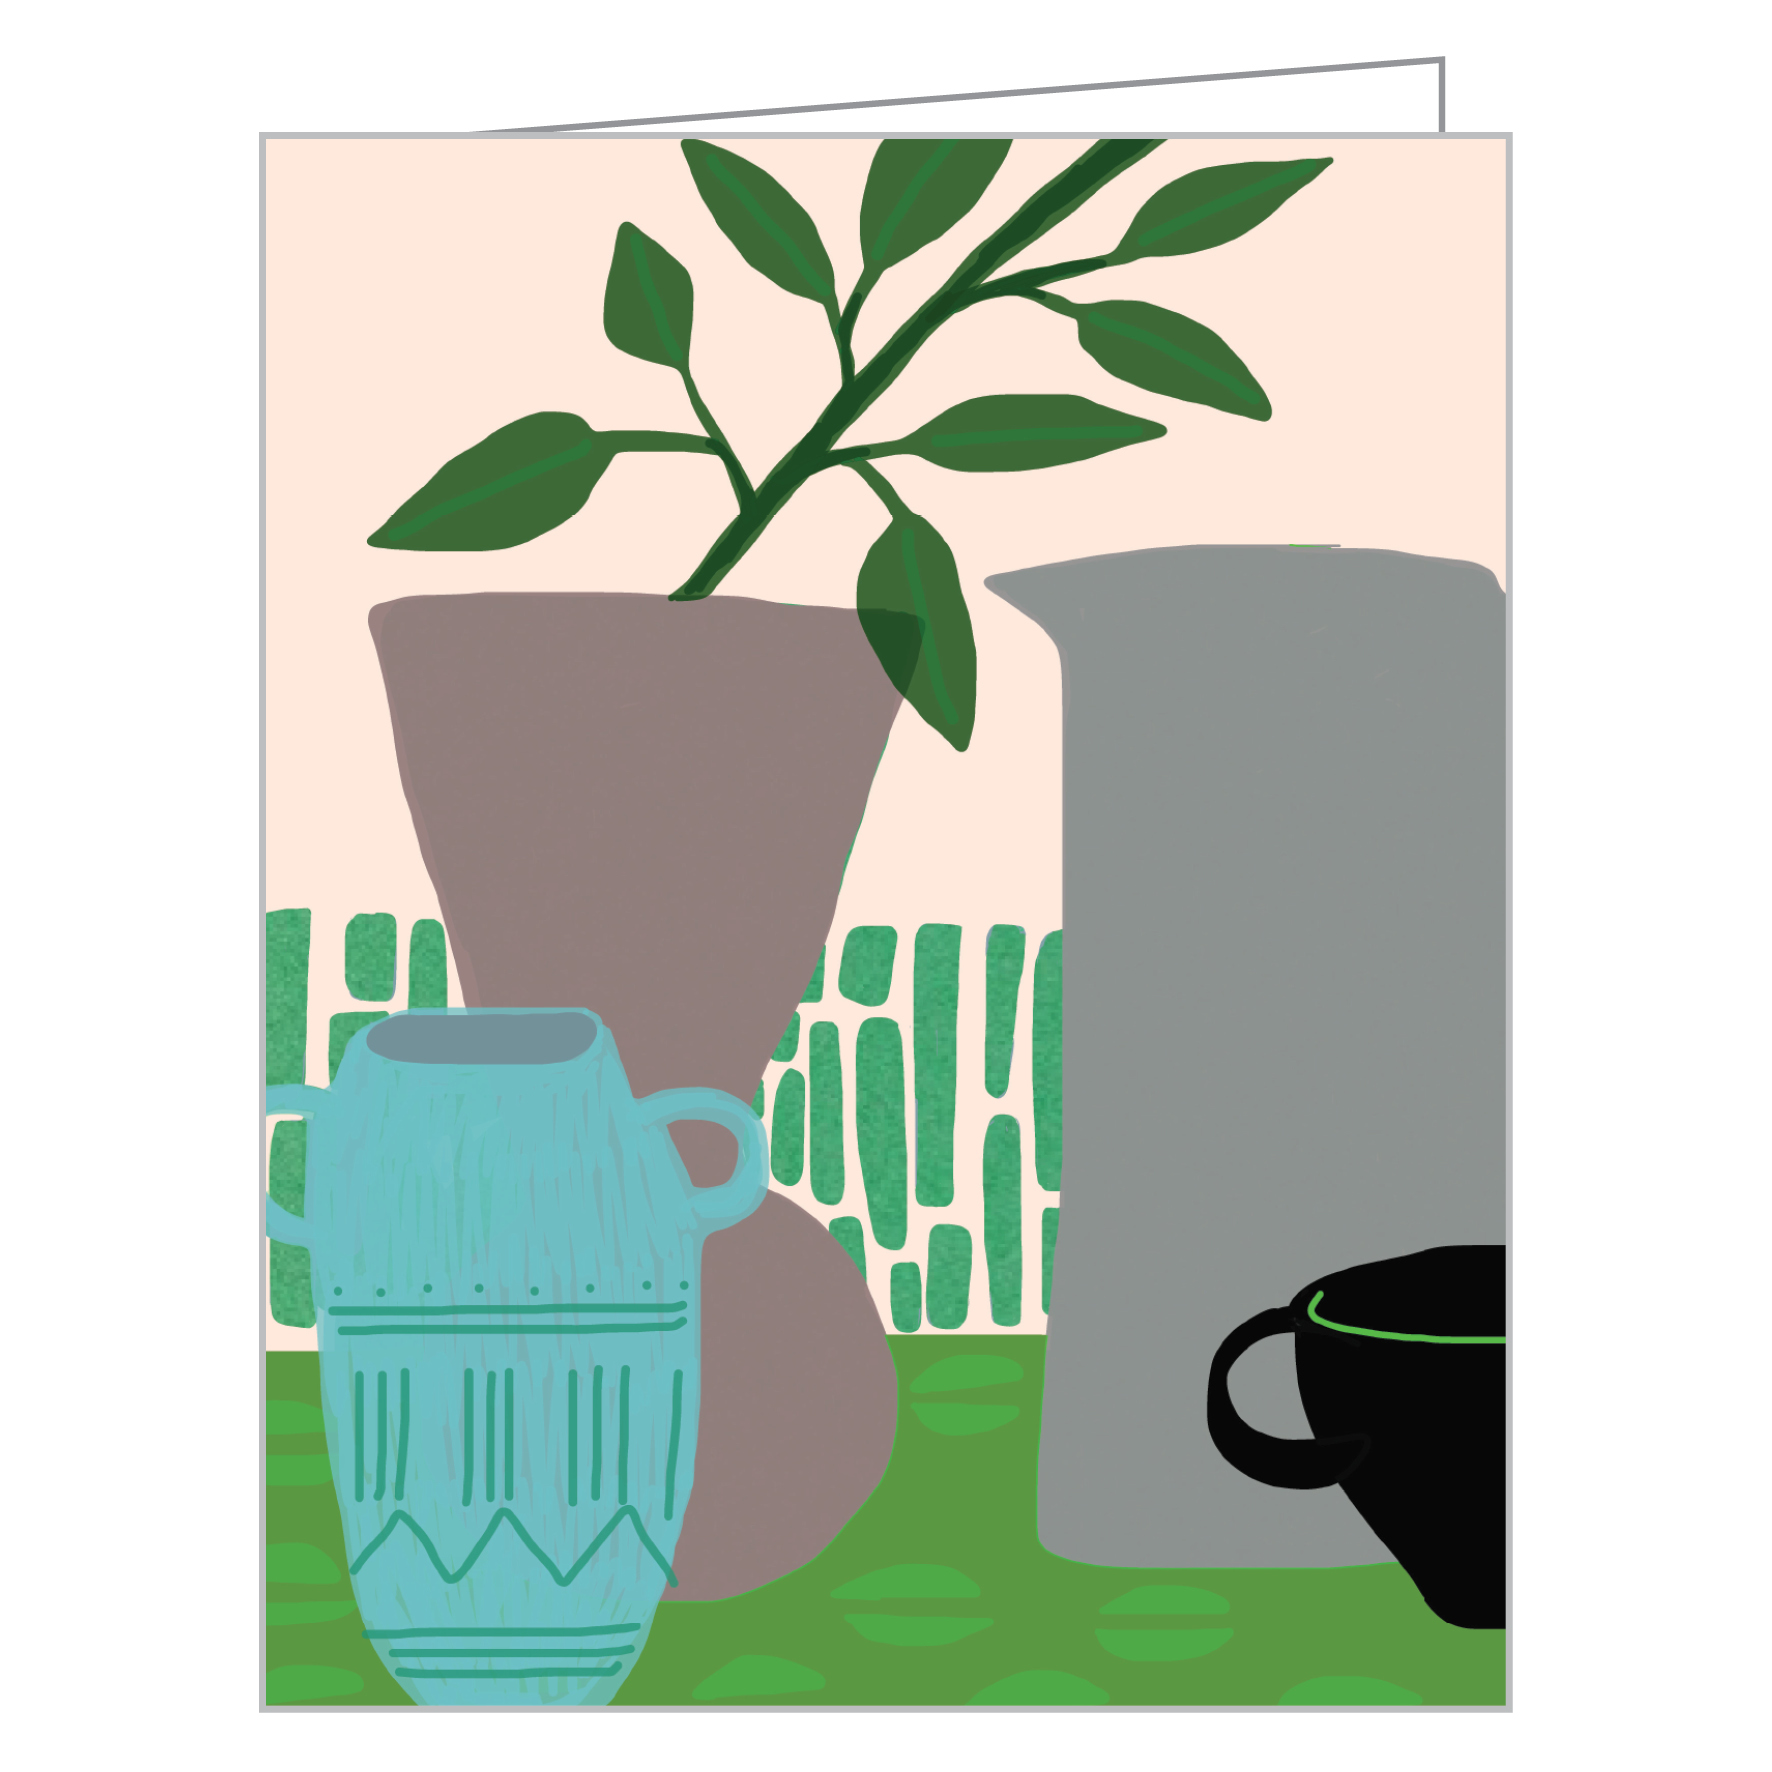 Anne Bentley's cream jug with lemon fruit foliage, on notecard box, by teNeues Stationery.